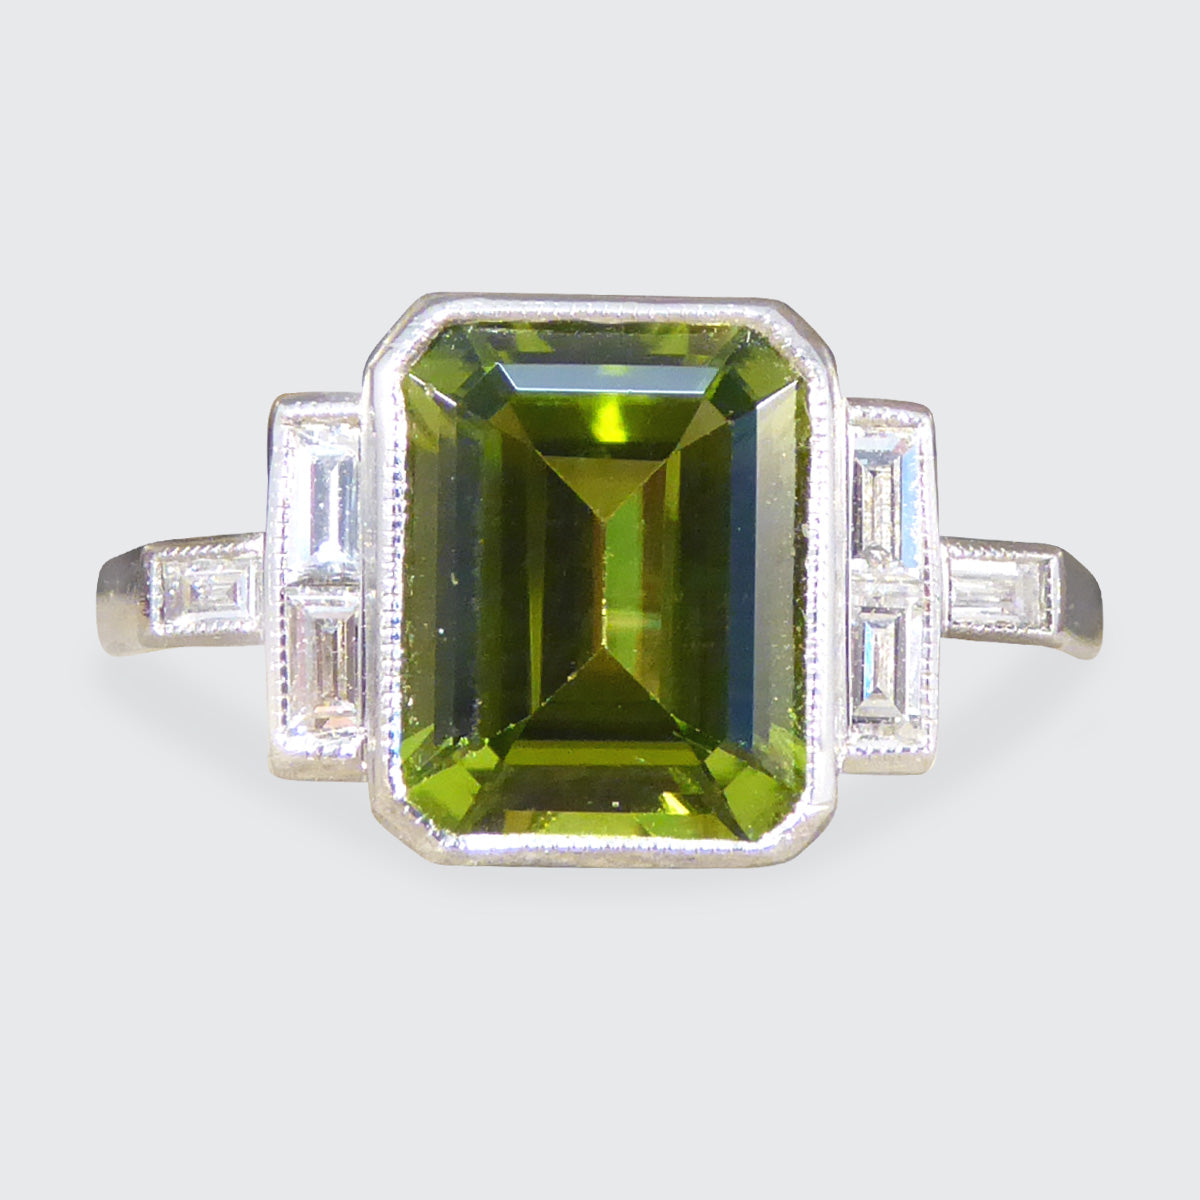 Art Deco Style Peridot Ring with Diamond Set Shoulder in Platinum